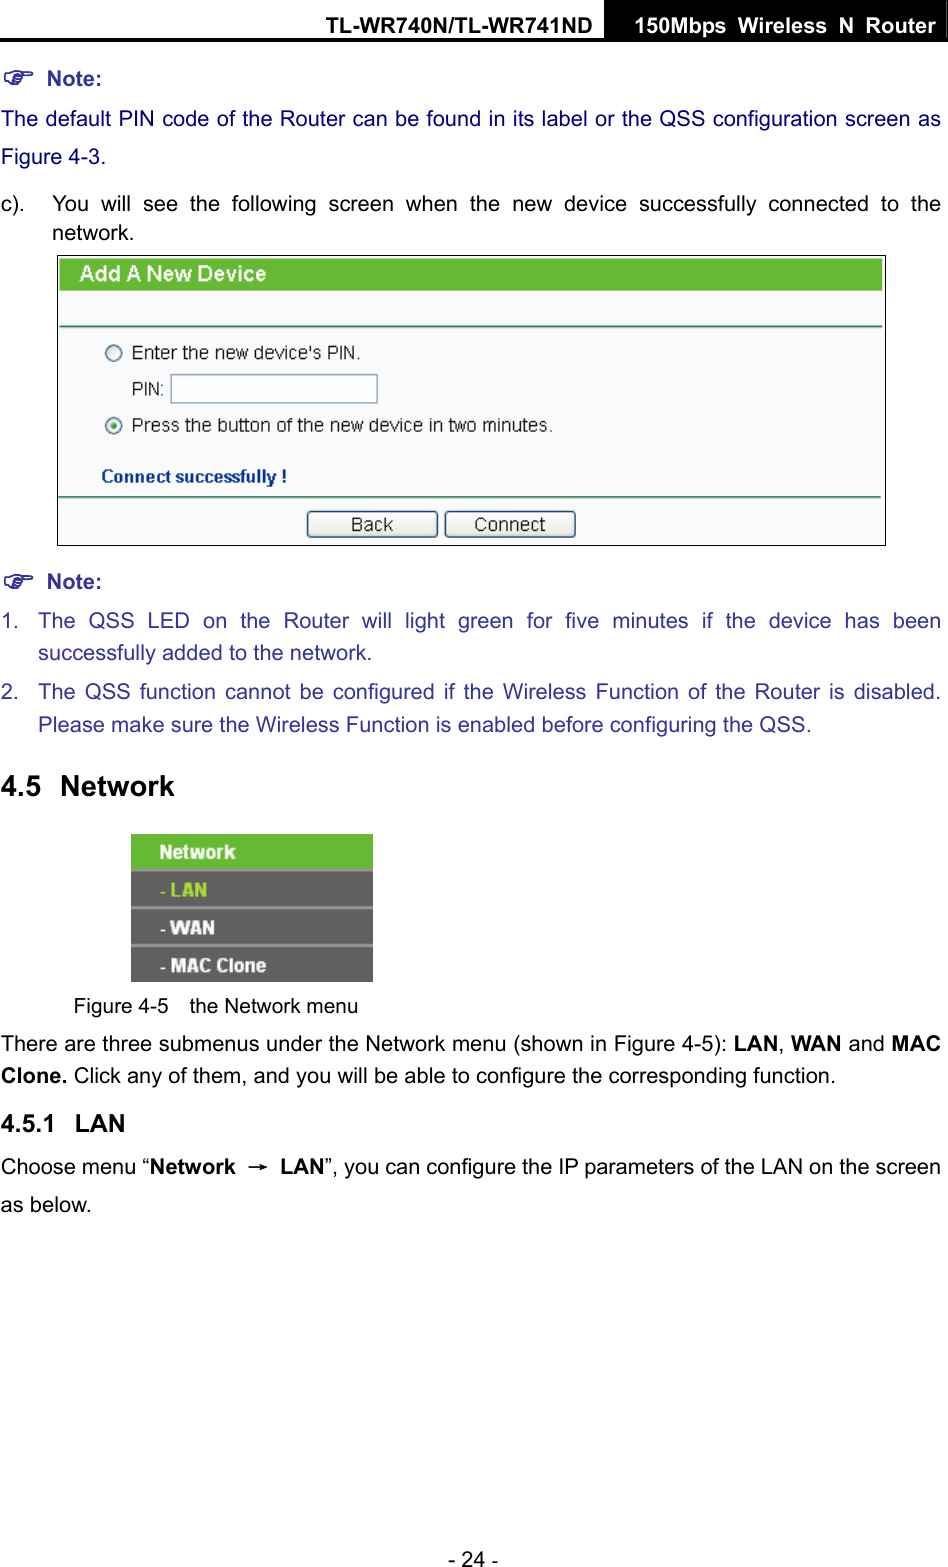 TL-WR740N/TL-WR741ND 150Mbps Wireless N Router - 24 - ) Note: The default PIN code of the Router can be found in its label or the QSS configuration screen as Figure 4-3. c).  You will see the following screen when the new device successfully connected to the network.  ) Note: 1.  The QSS LED on the Router will light green for five minutes if the device has been successfully added to the network. 2.  The QSS function cannot be configured if the Wireless Function of the Router is disabled. Please make sure the Wireless Function is enabled before configuring the QSS. 4.5  Network  Figure 4-5  the Network menu There are three submenus under the Network menu (shown in Figure 4-5): LAN, WAN and MAC Clone. Click any of them, and you will be able to configure the corresponding function.   4.5.1  LAN Choose menu “Network  → LAN”, you can configure the IP parameters of the LAN on the screen as below. 